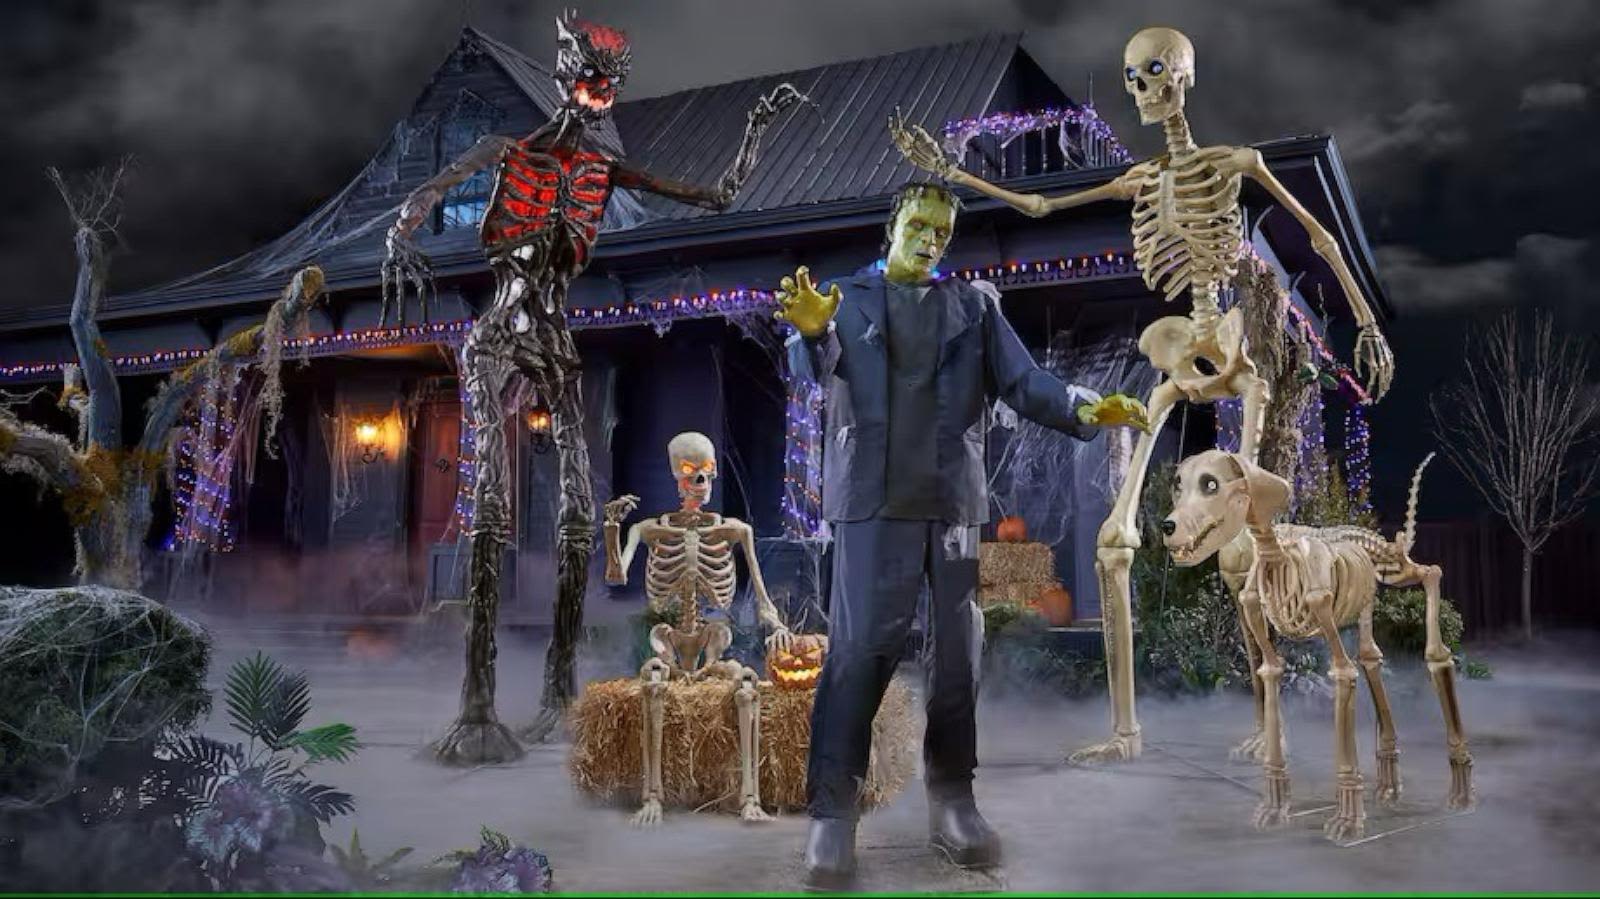 Home Depot's official Halloween launch is here! Shop giant skeletons, headless horsemen and more